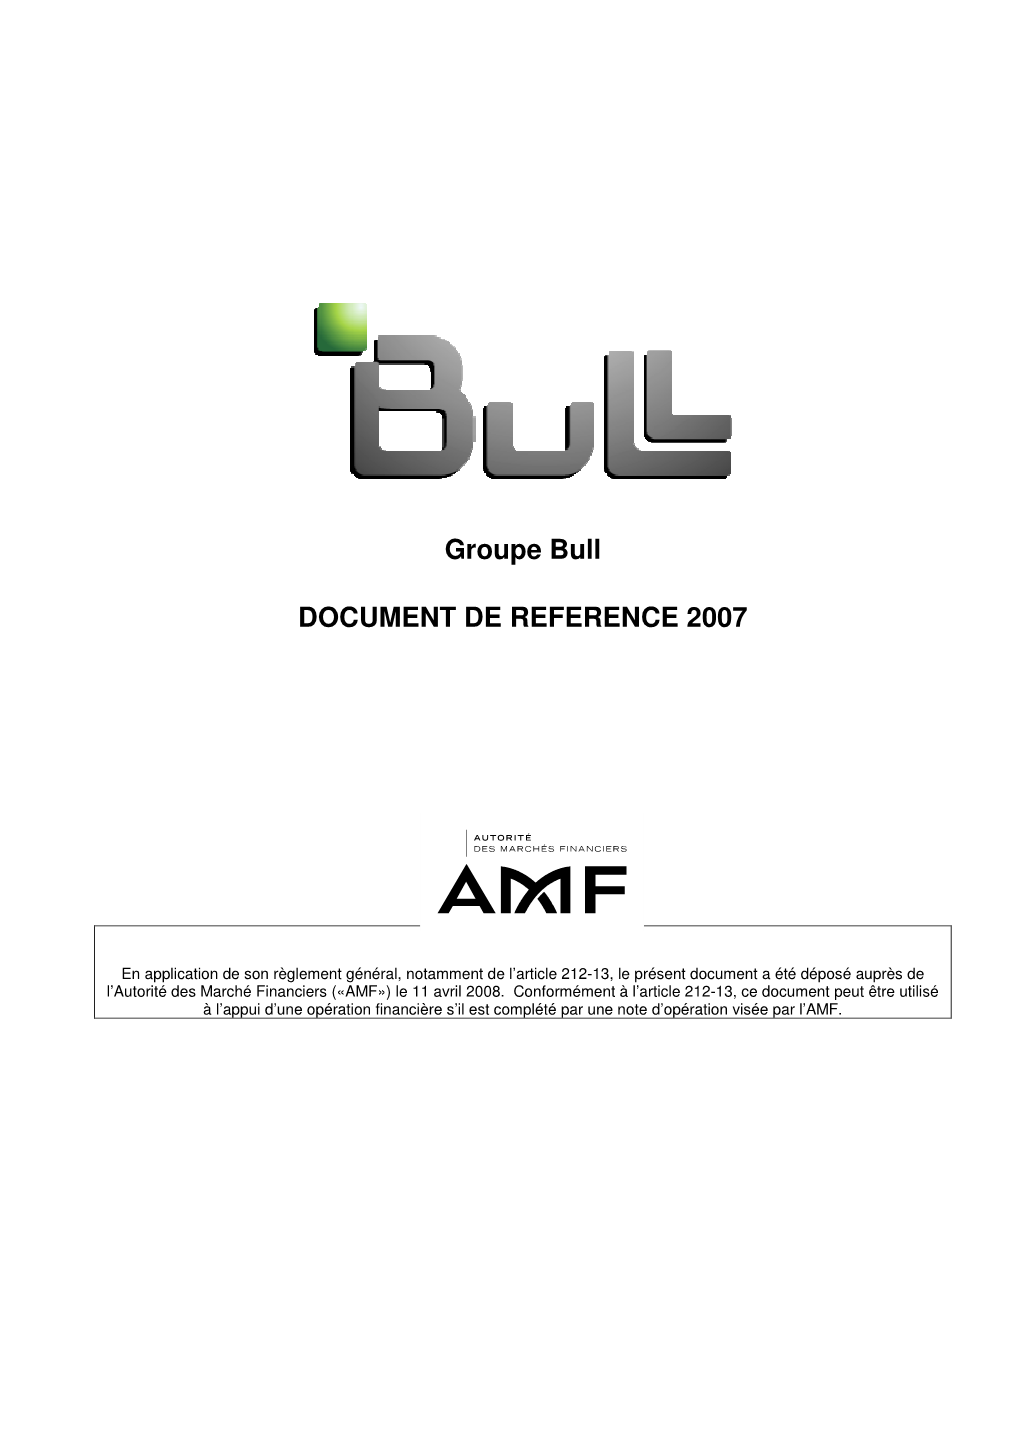 Groupe Bull DOCUMENT DE REFERENCE 2007